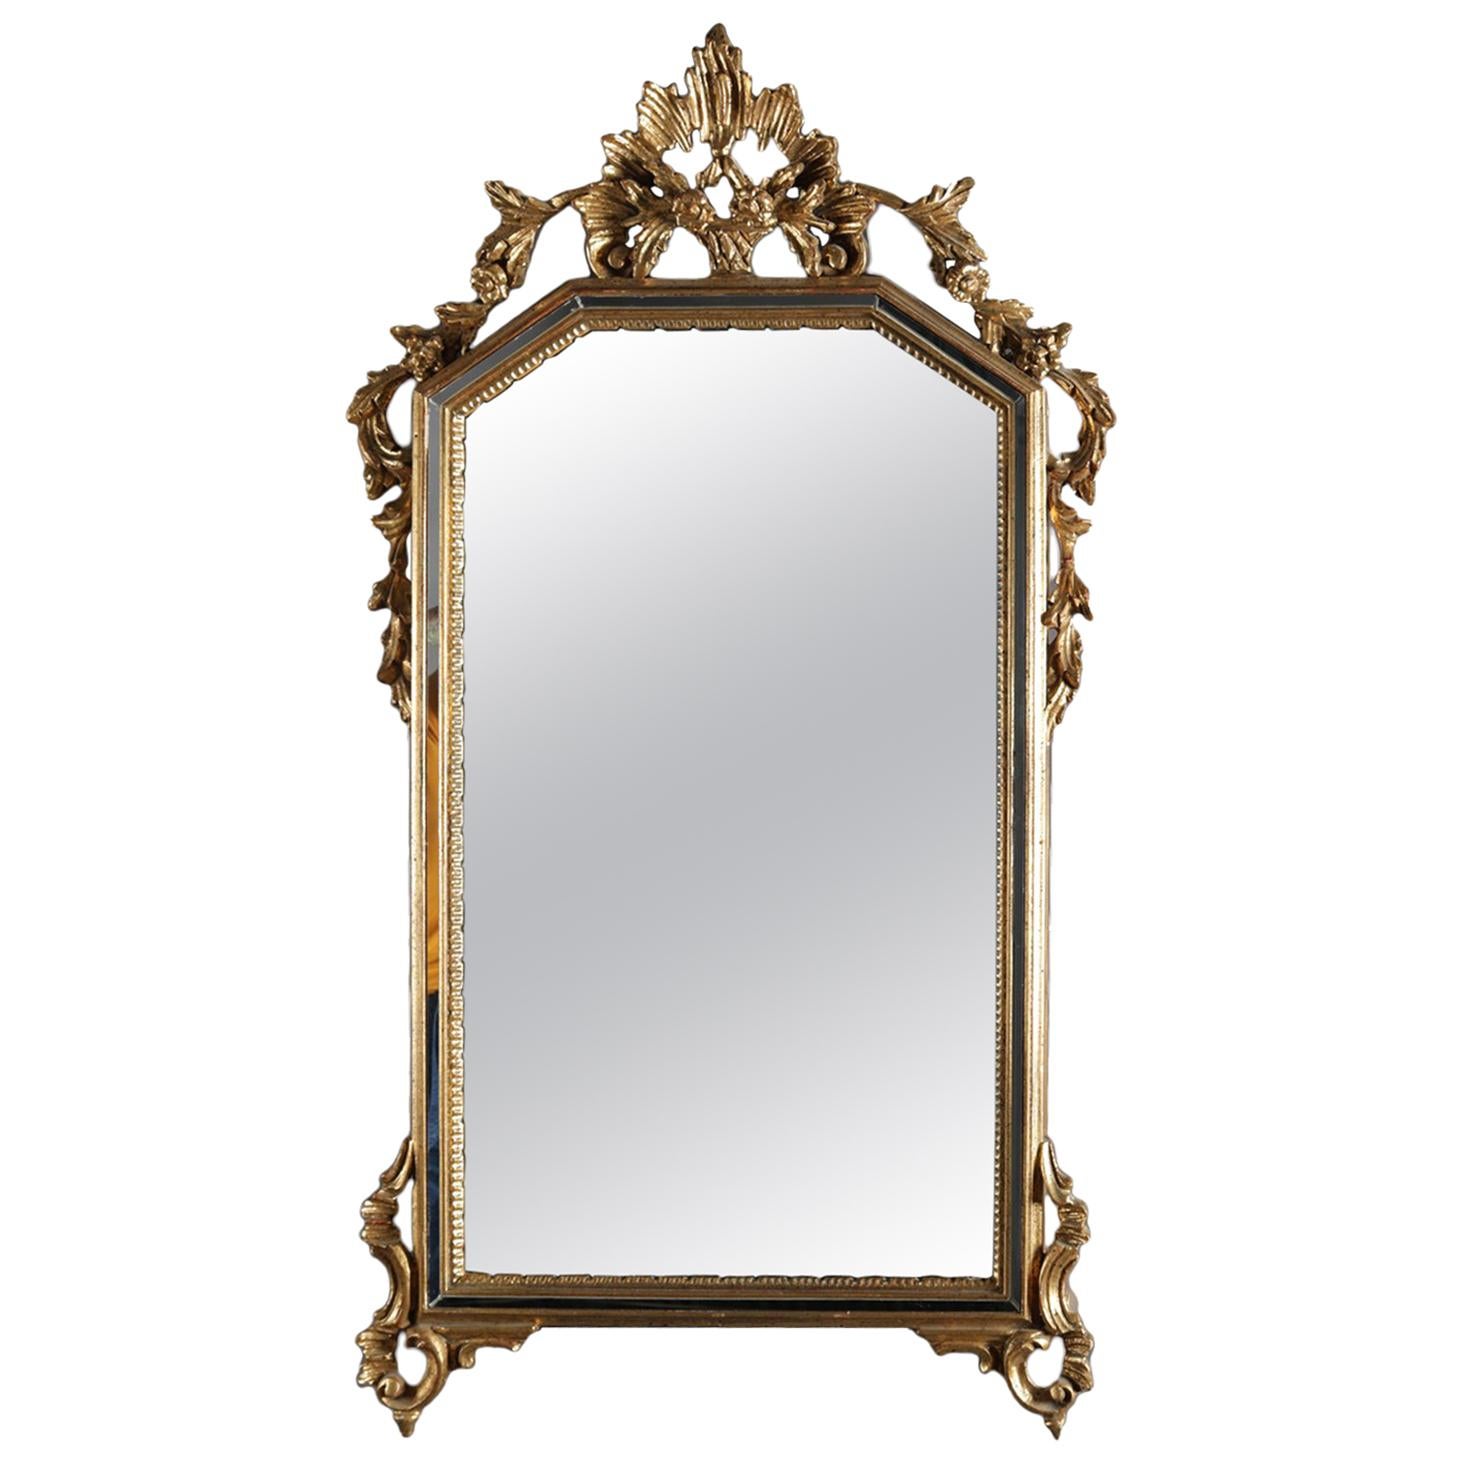 Antique French Louis XIV Style Giltwood Parclose Wall Mirror, circa 1920